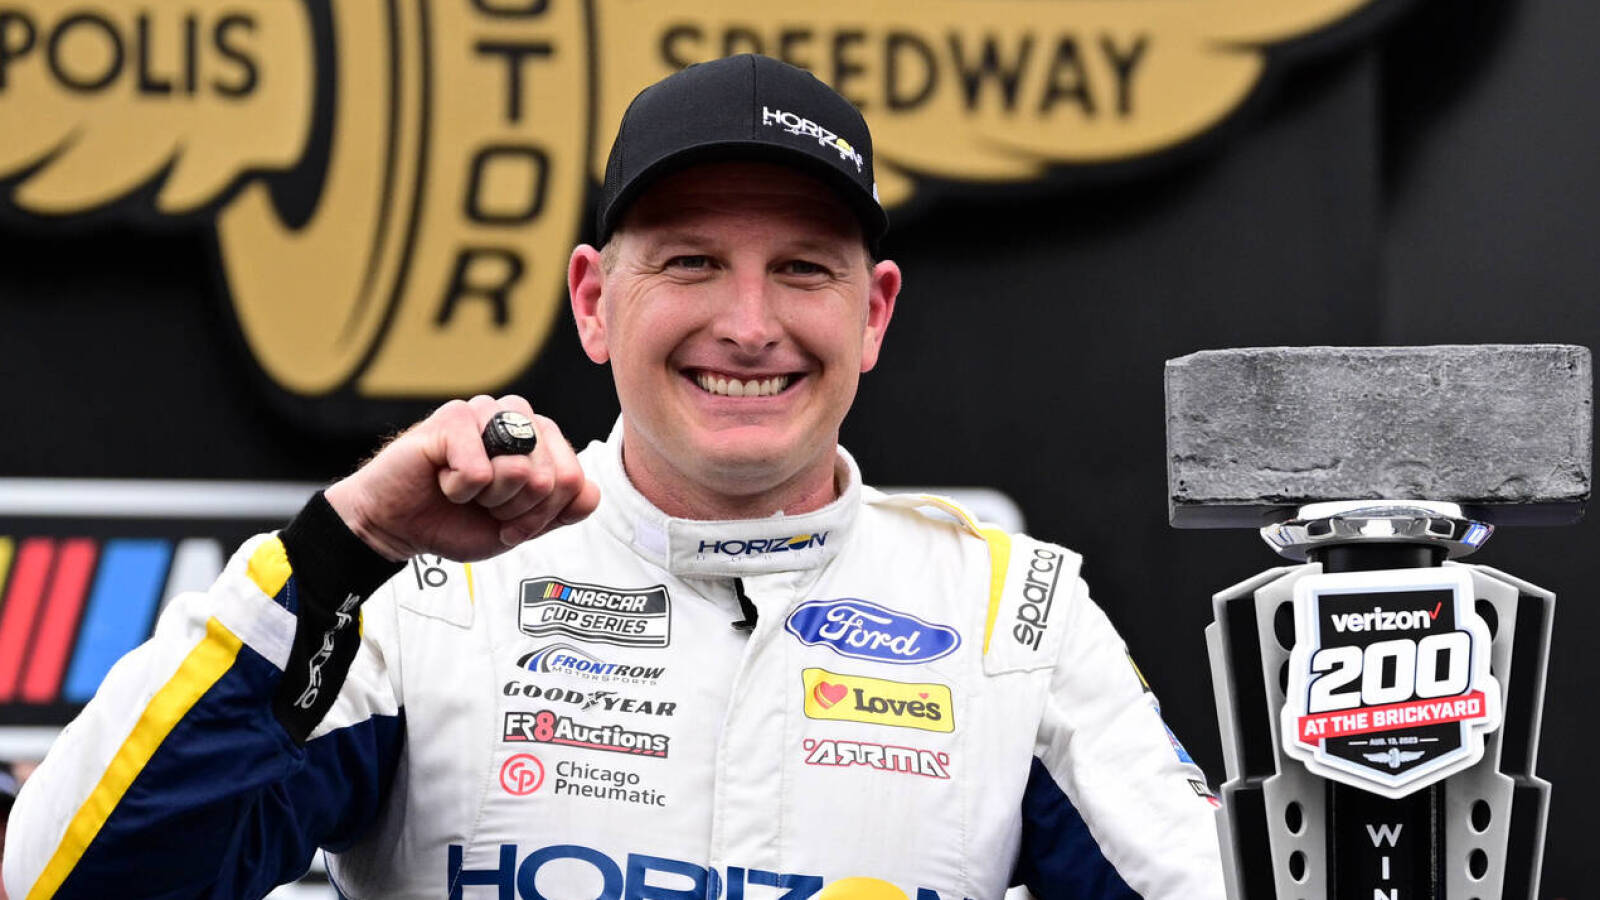 Indy road course leads to postseason berth for Michael McDowell